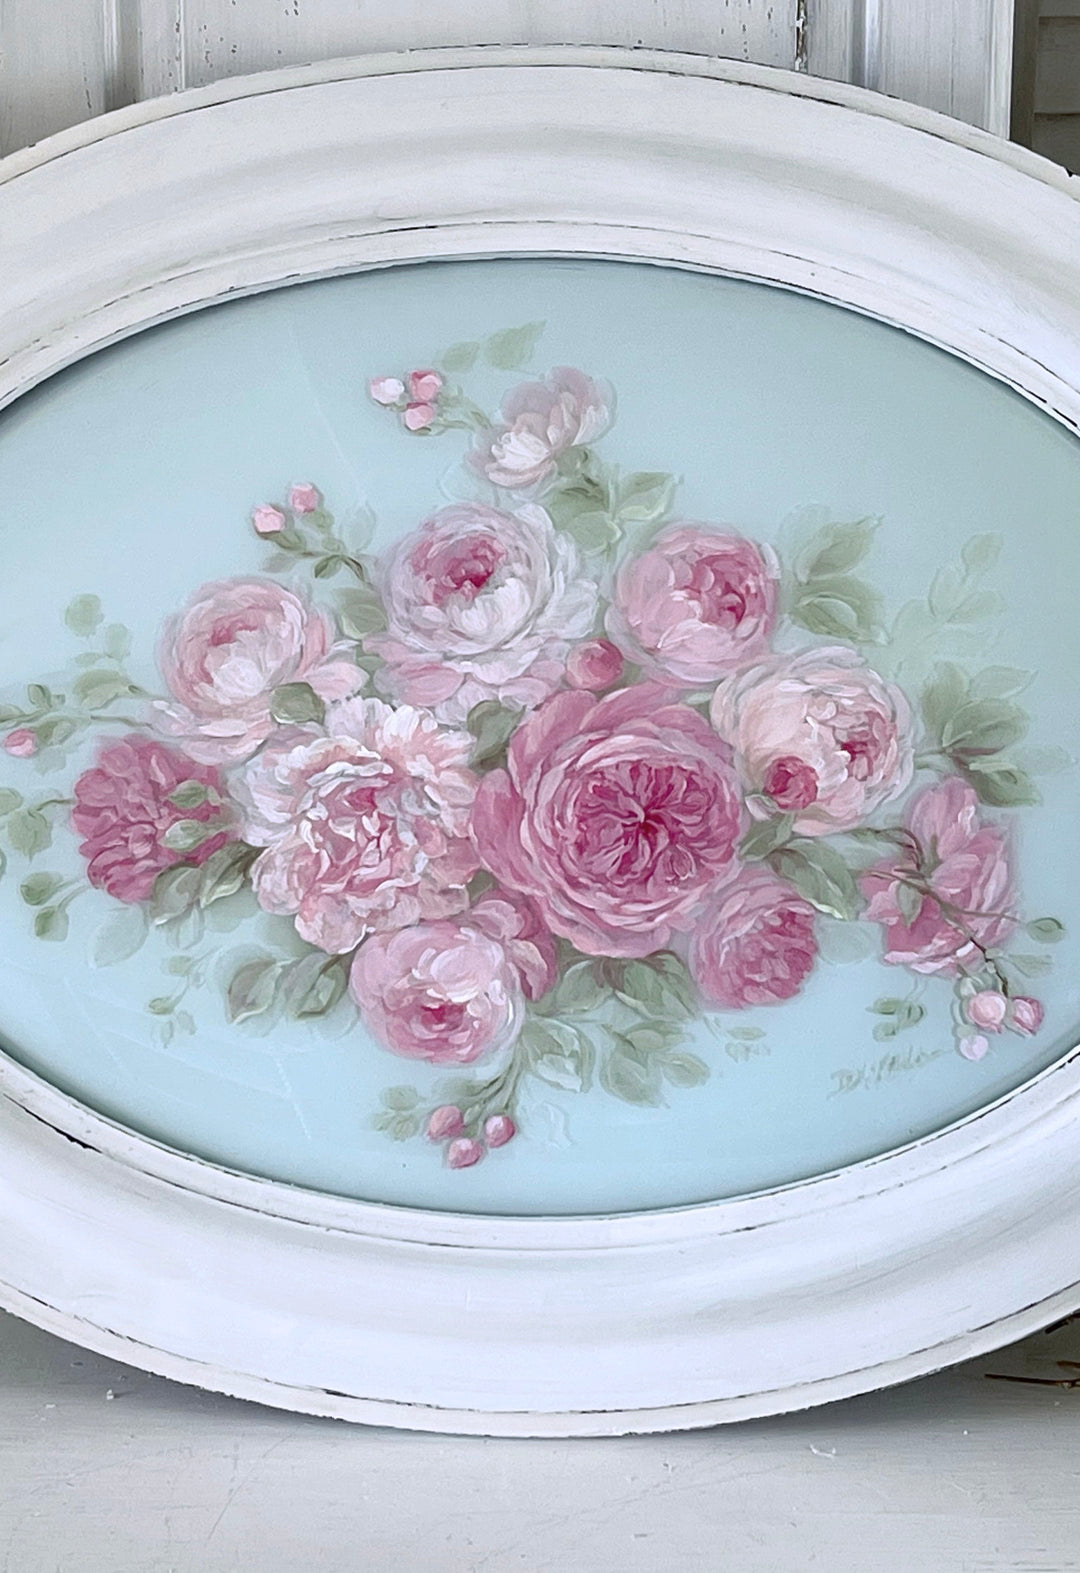 Shabby Chic Antique Roses Wood Framed Original Painting On Convex Glass by Debi Coules